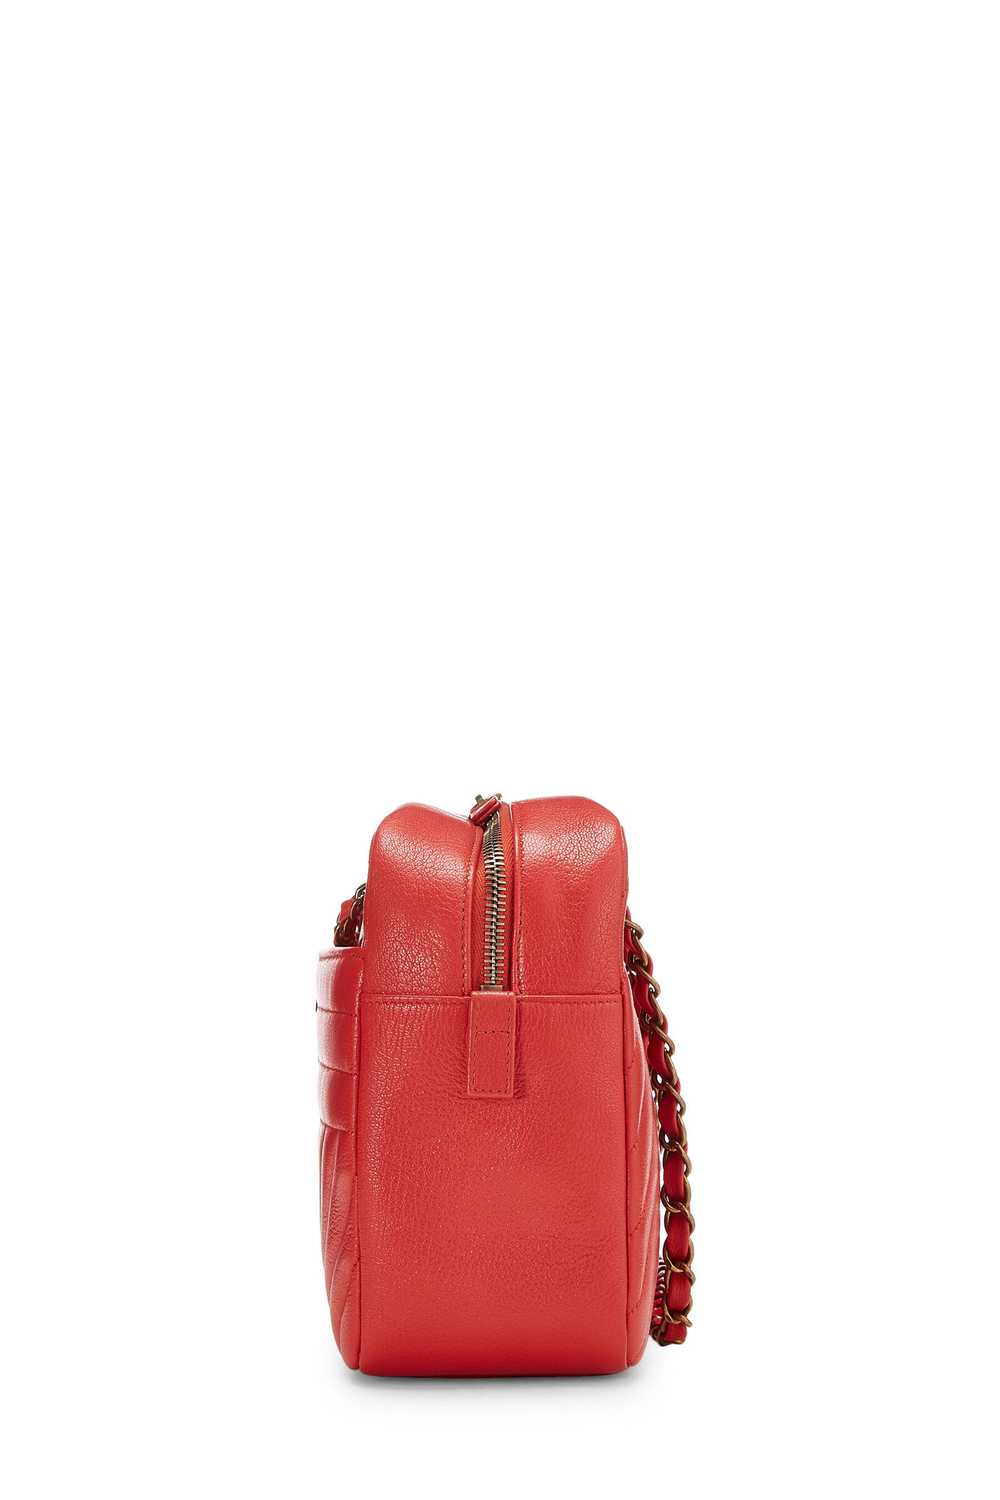 Red Quilted Lambskin Diagonal Camera Bag Large - image 5